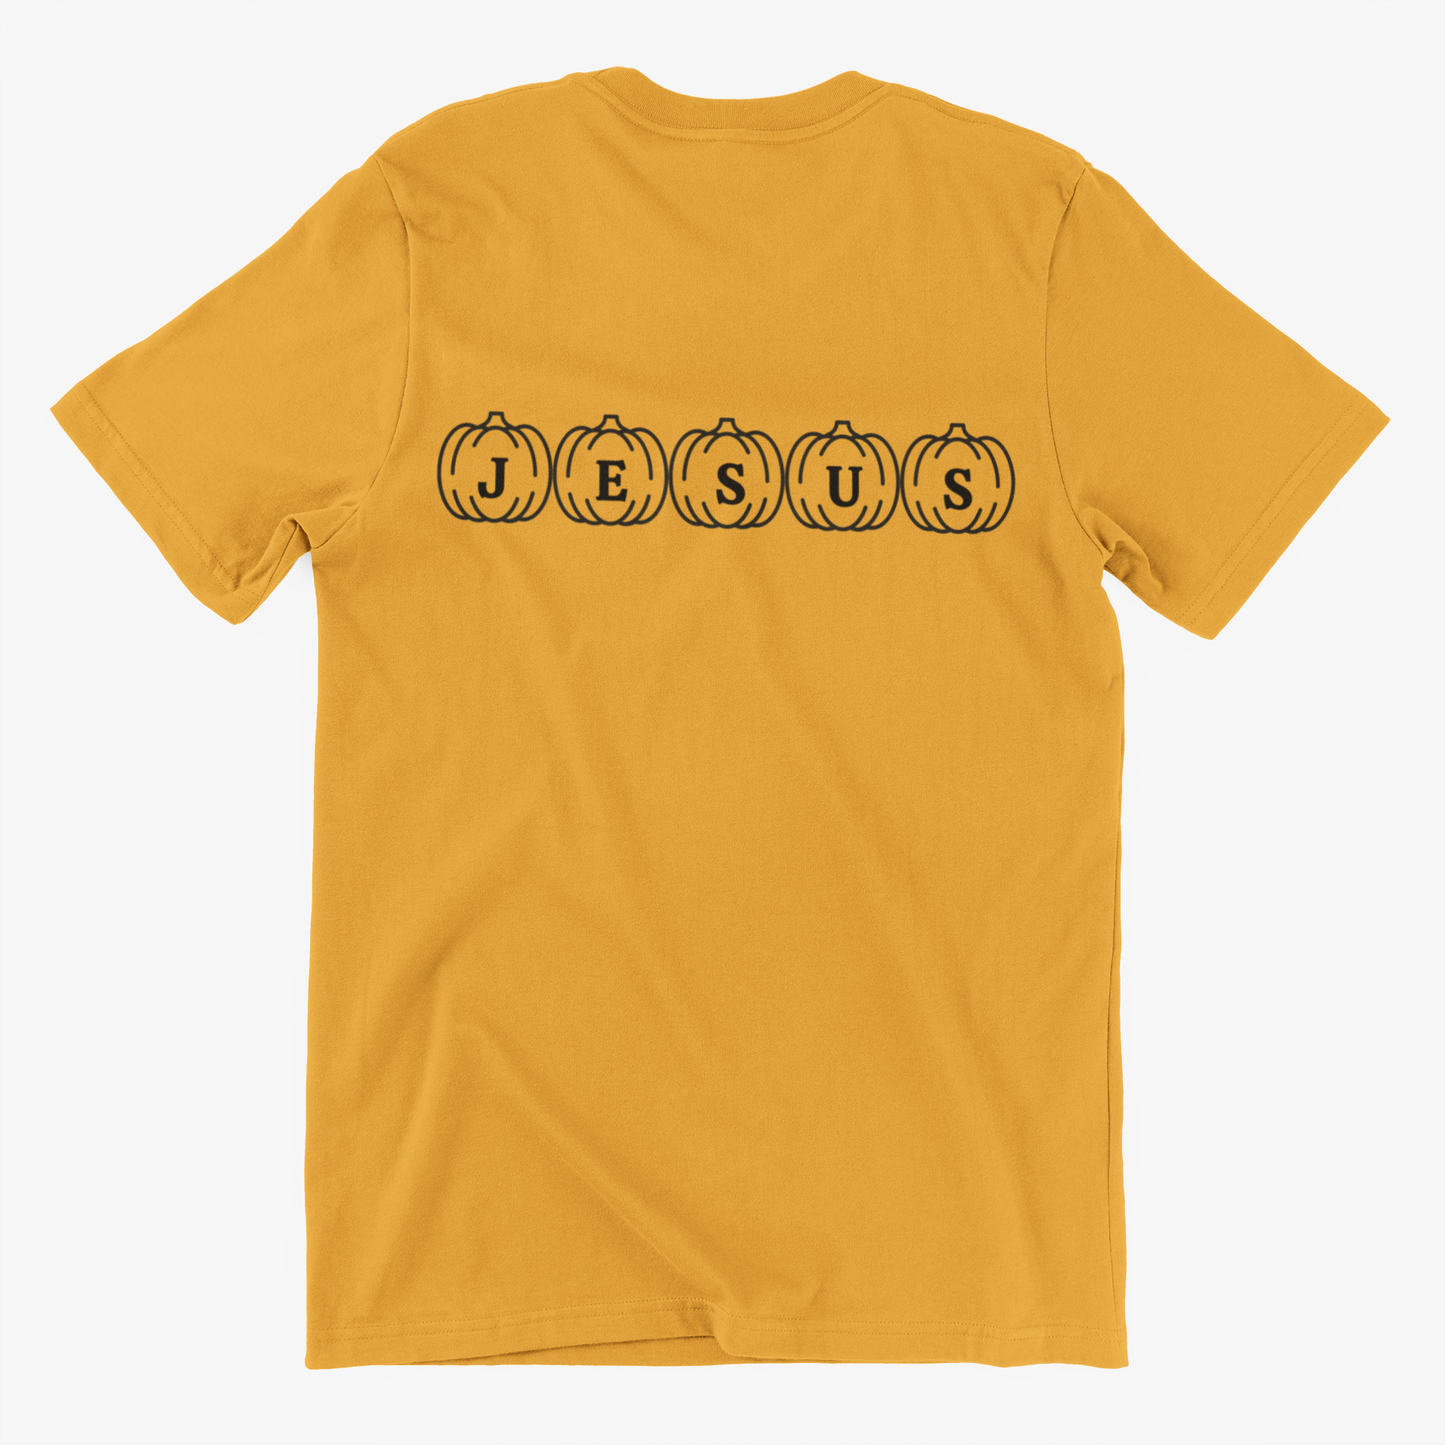 Jesus on pumpkins graphic t-shirt for fall